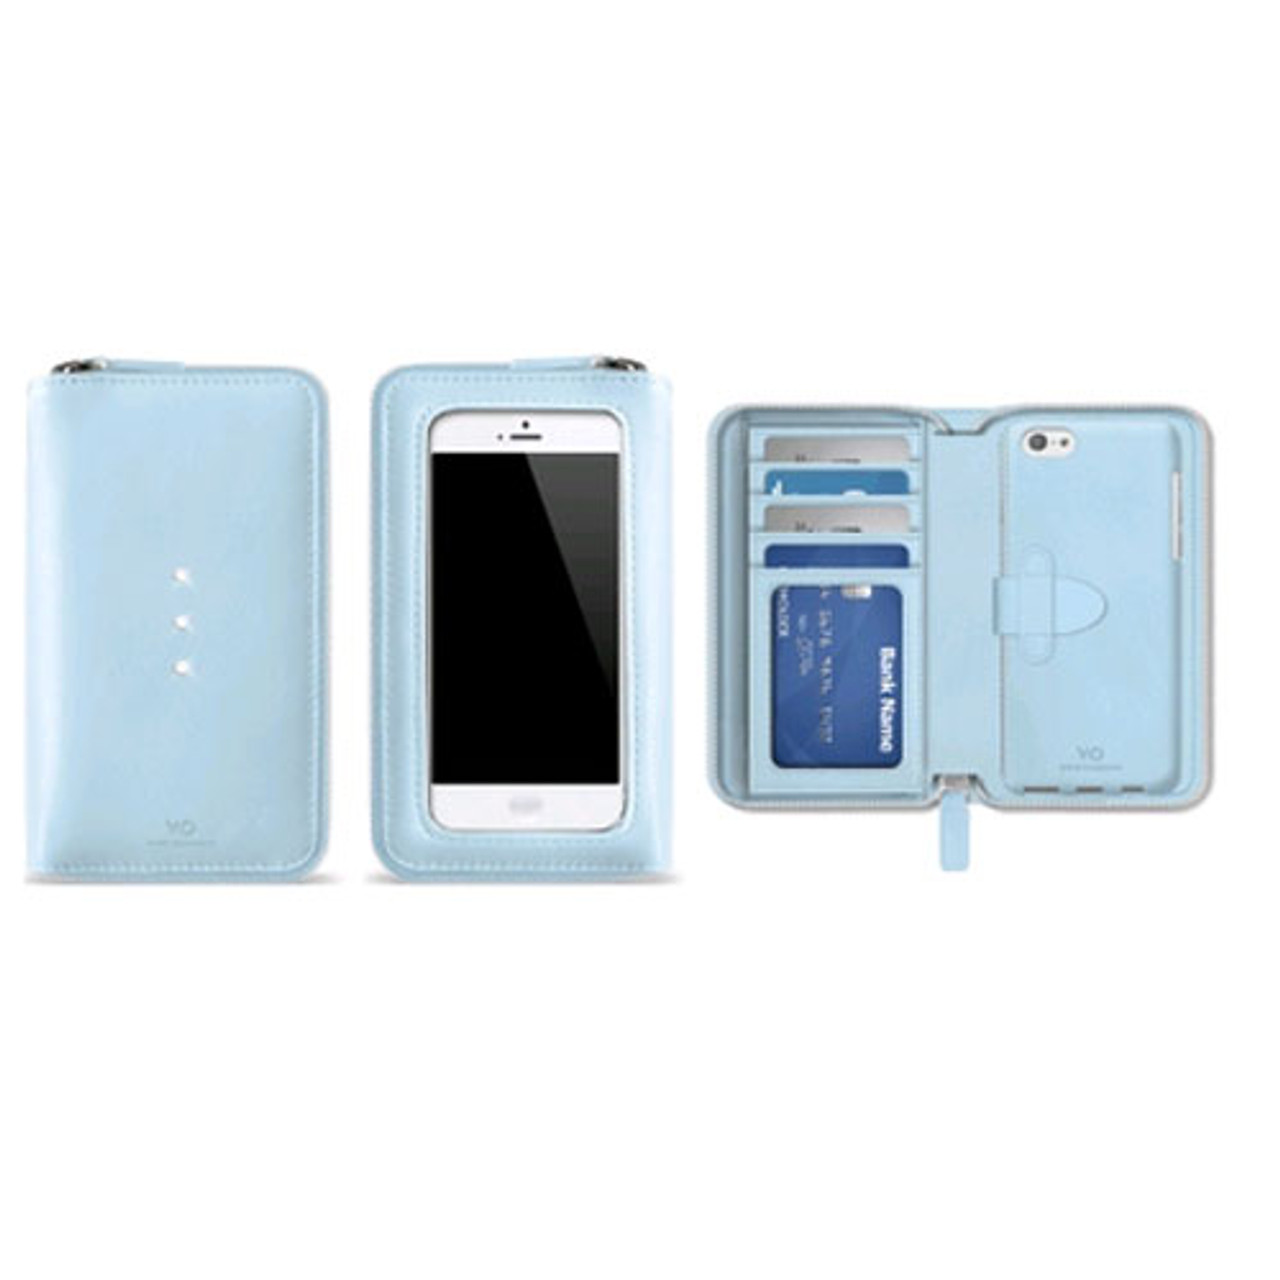 PurseCase for iPhone - Wallet Case, Wristlet Clutch with Crossbody Chain  (Turquoise with Silver, iPhone 6 Plus / 6S Plus) - Walmart.com